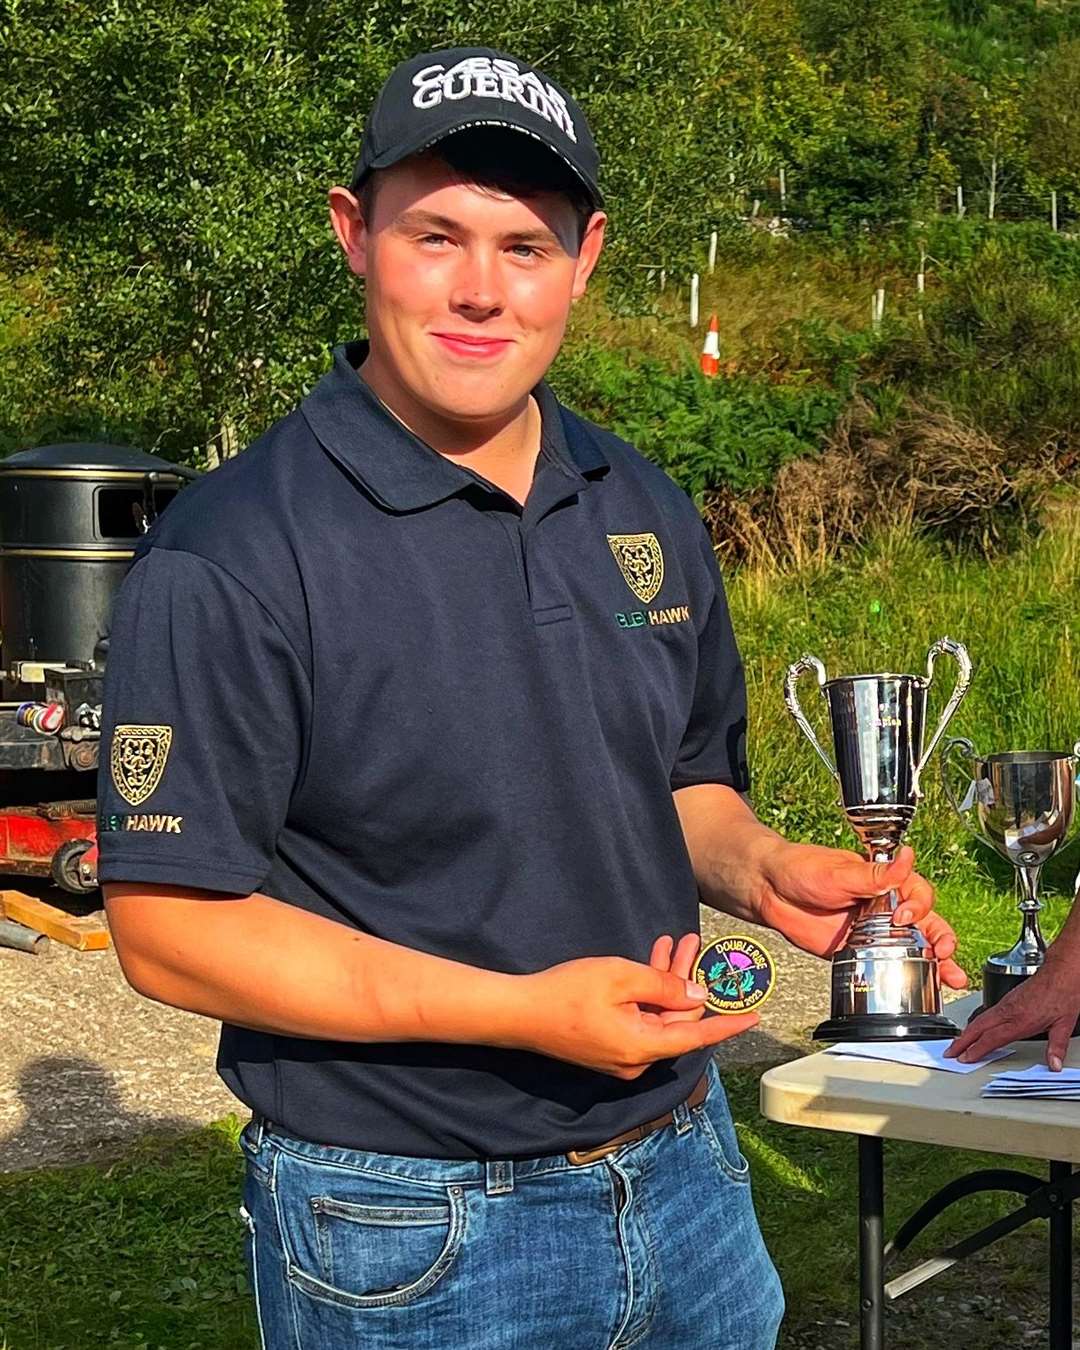 Hamish shot his way into number one place to retain the Scottish junior champion trophy.